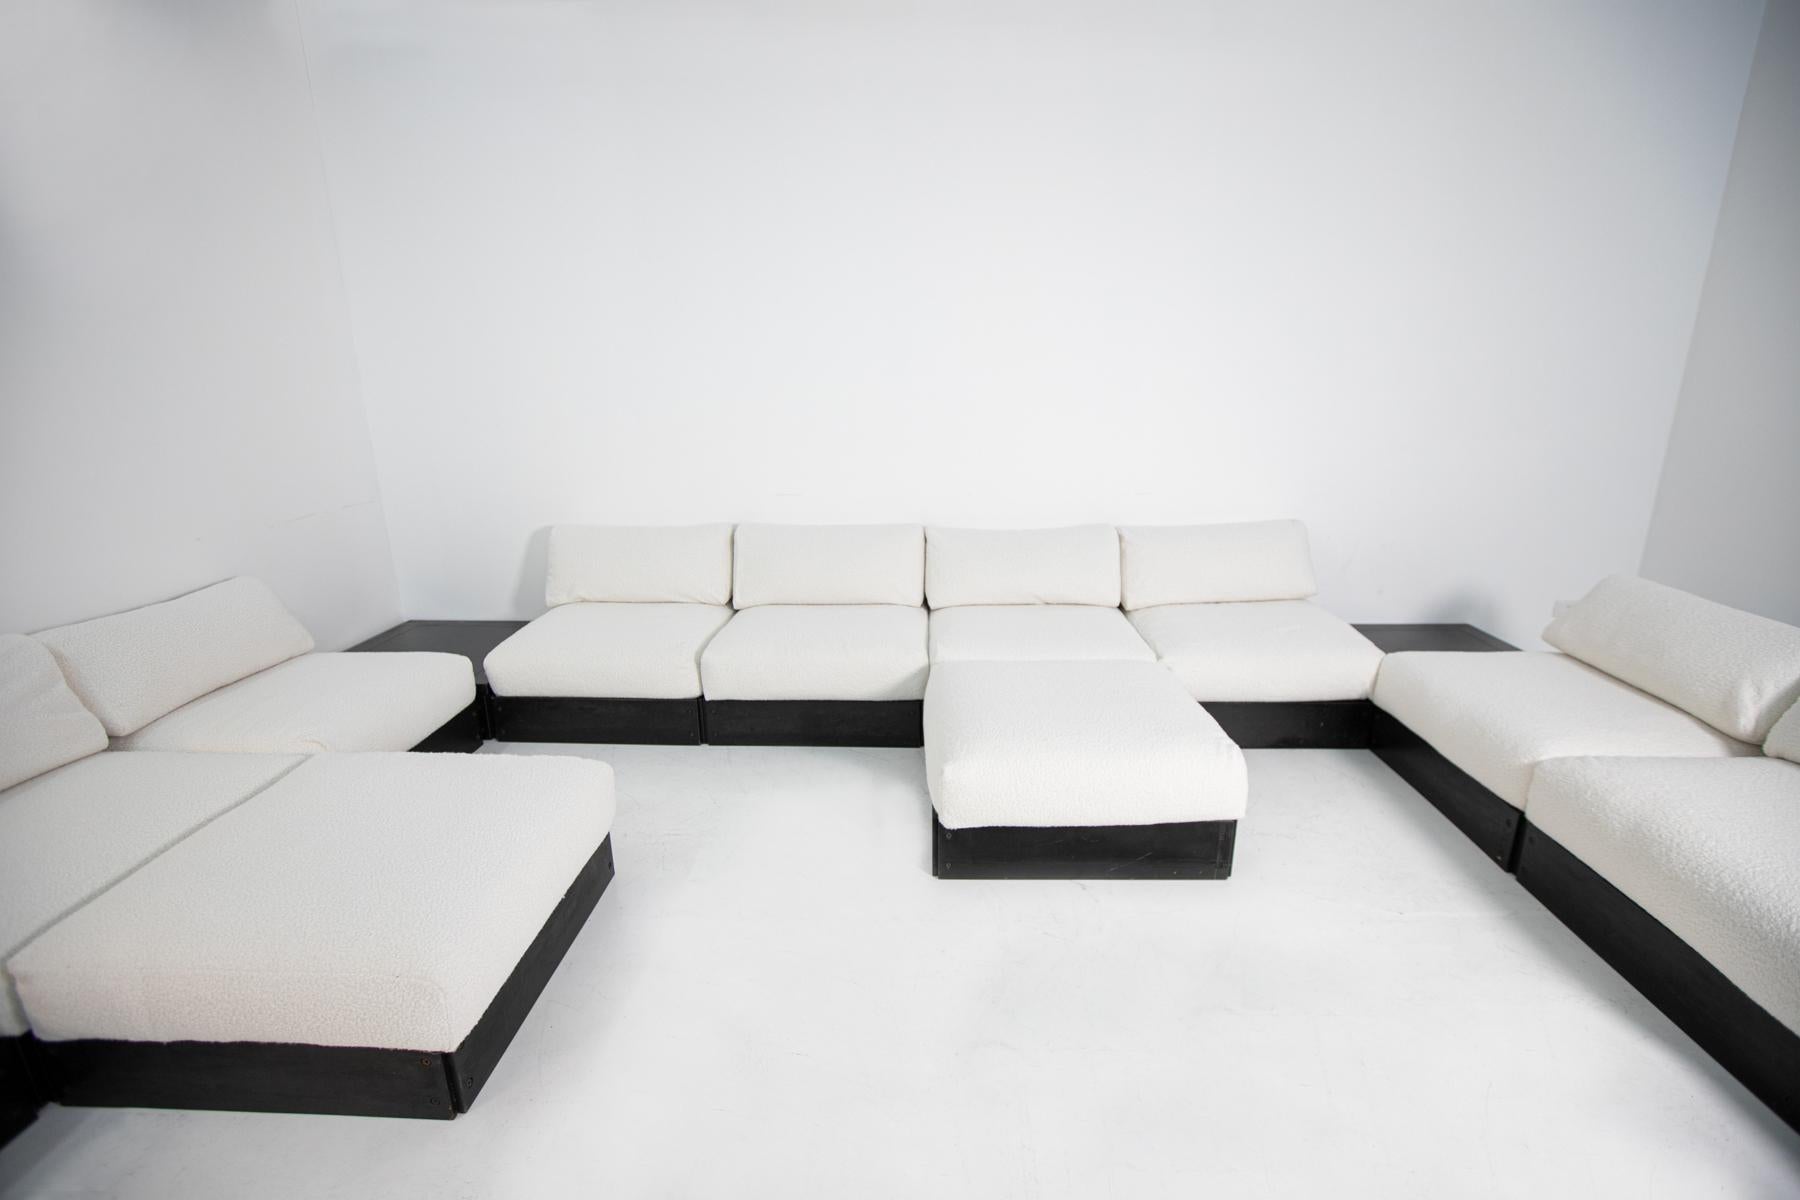 Magnificent and large modular sofa by Heide Rolf. The sofa is called nine-seat sofa, made by ICF, 1970s. The sofa is made of square modules with structure in black stained wood and cushions, both for the seat and the back, in white bouclè fabric.